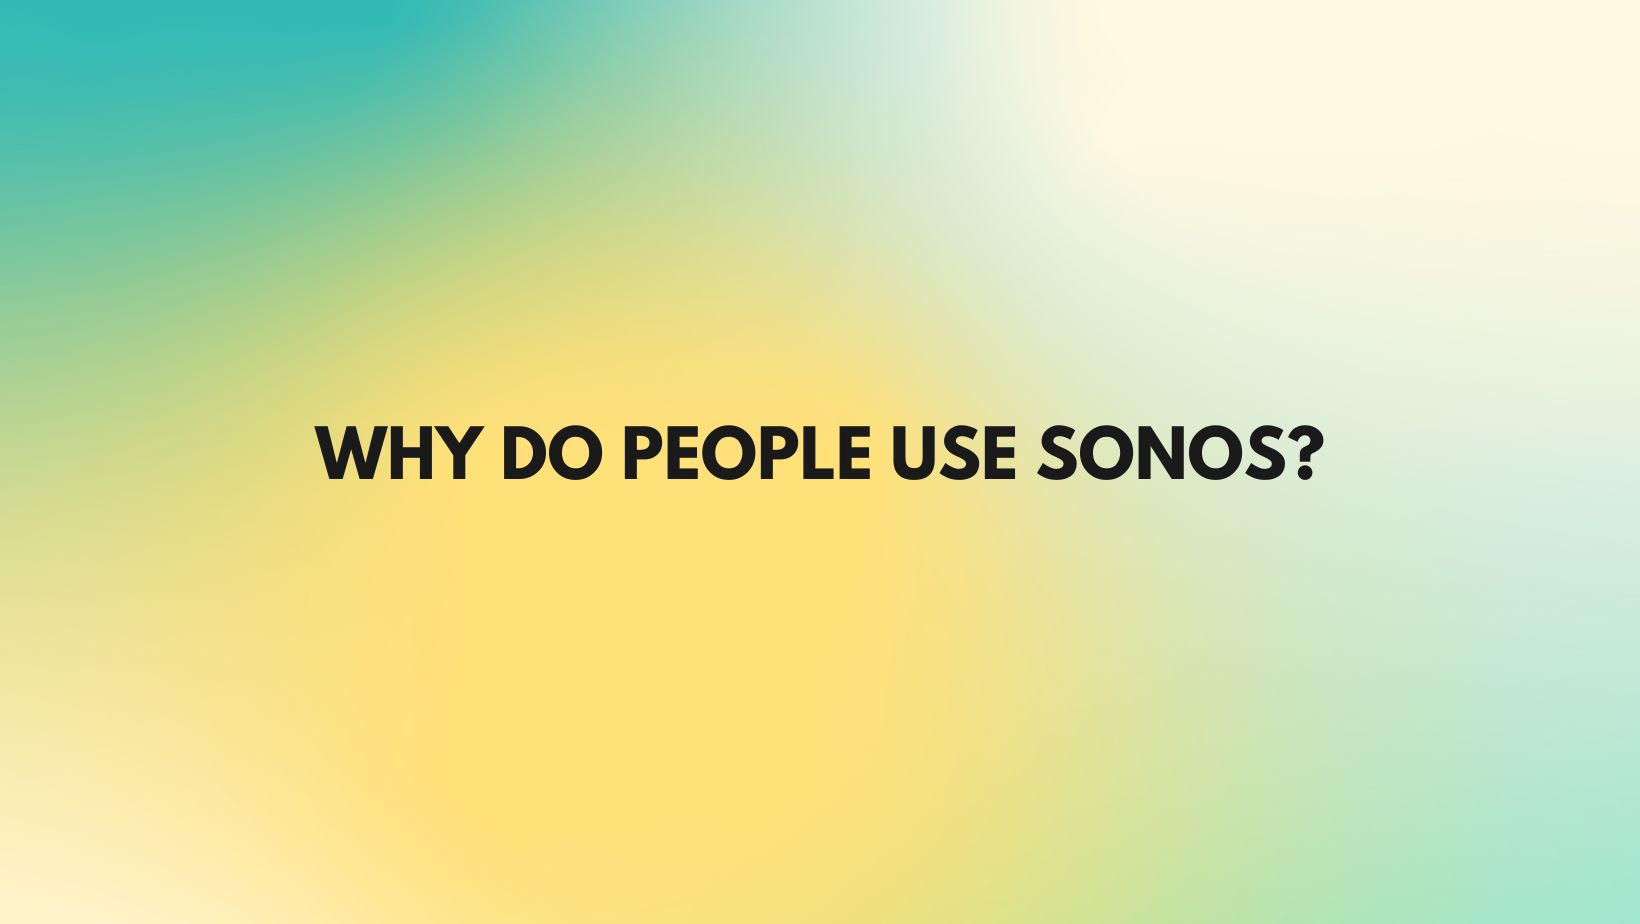 Why do people use Sonos?